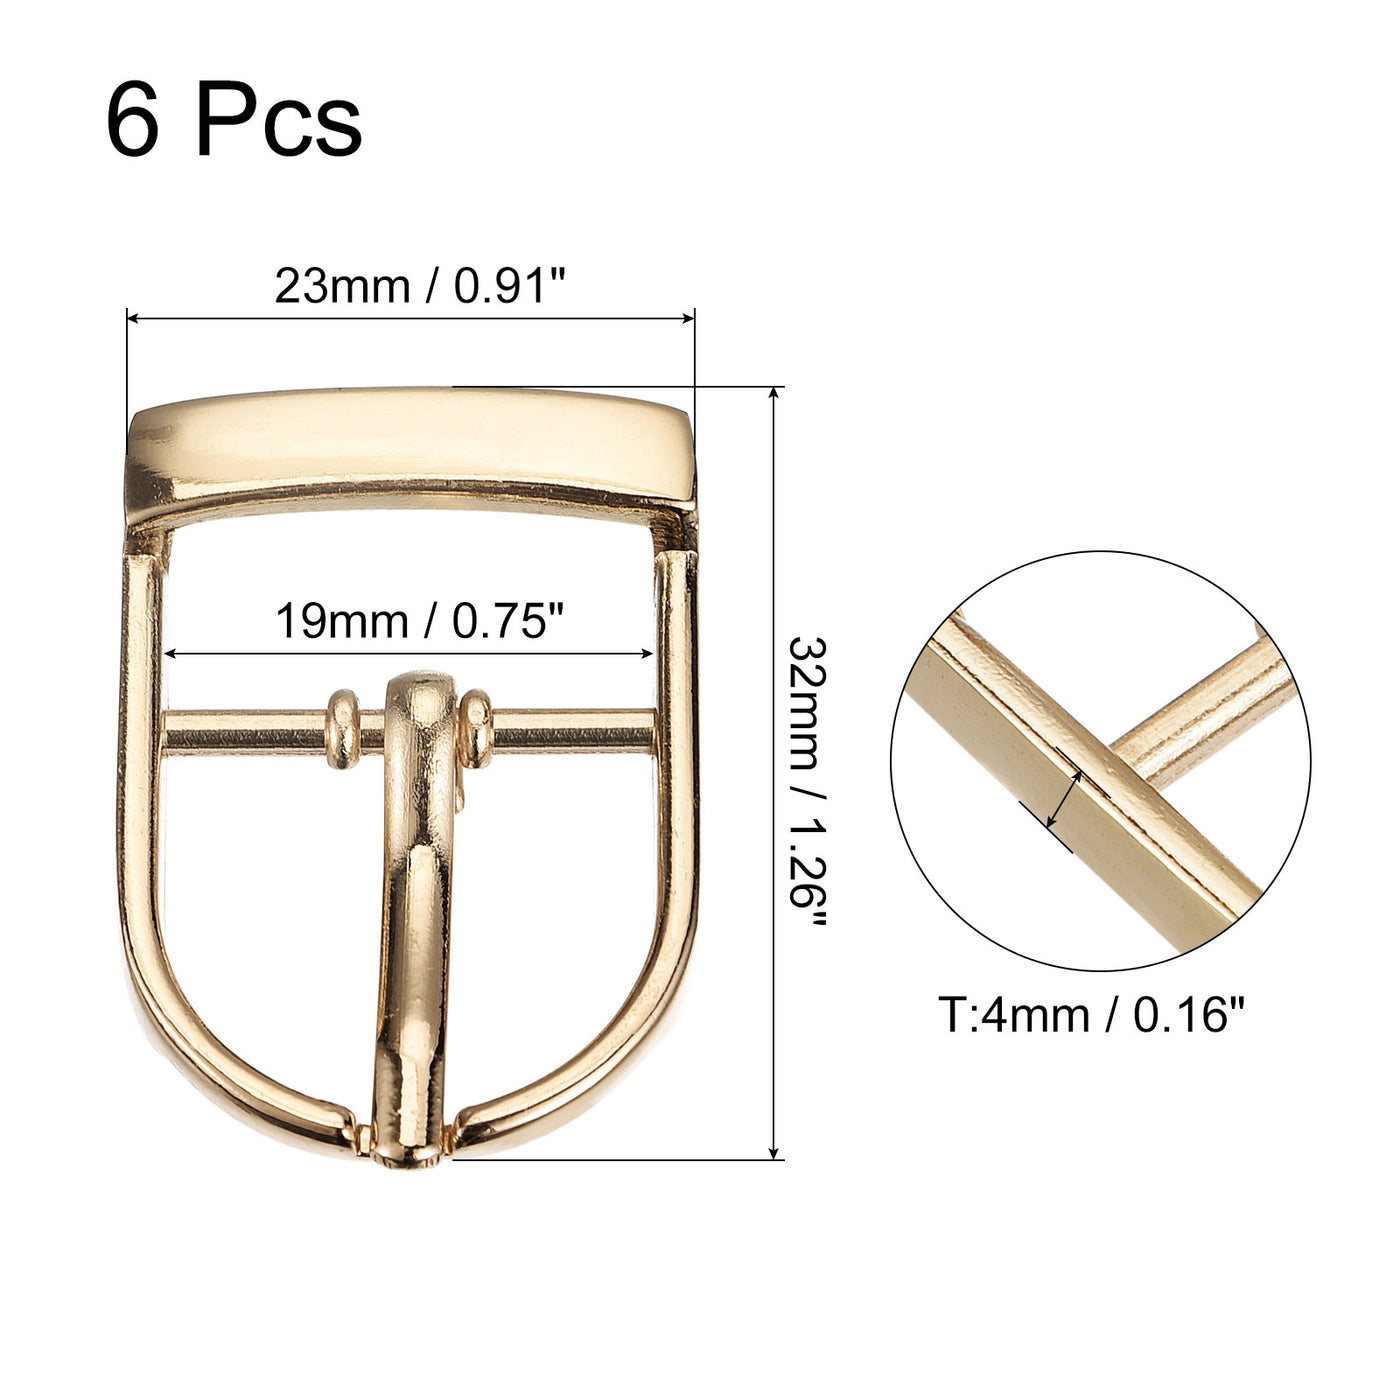 uxcell Uxcell 6Pcs 0.75" Single Prong Belt Buckle Oval Center Bar Buckles for Belts, Gold